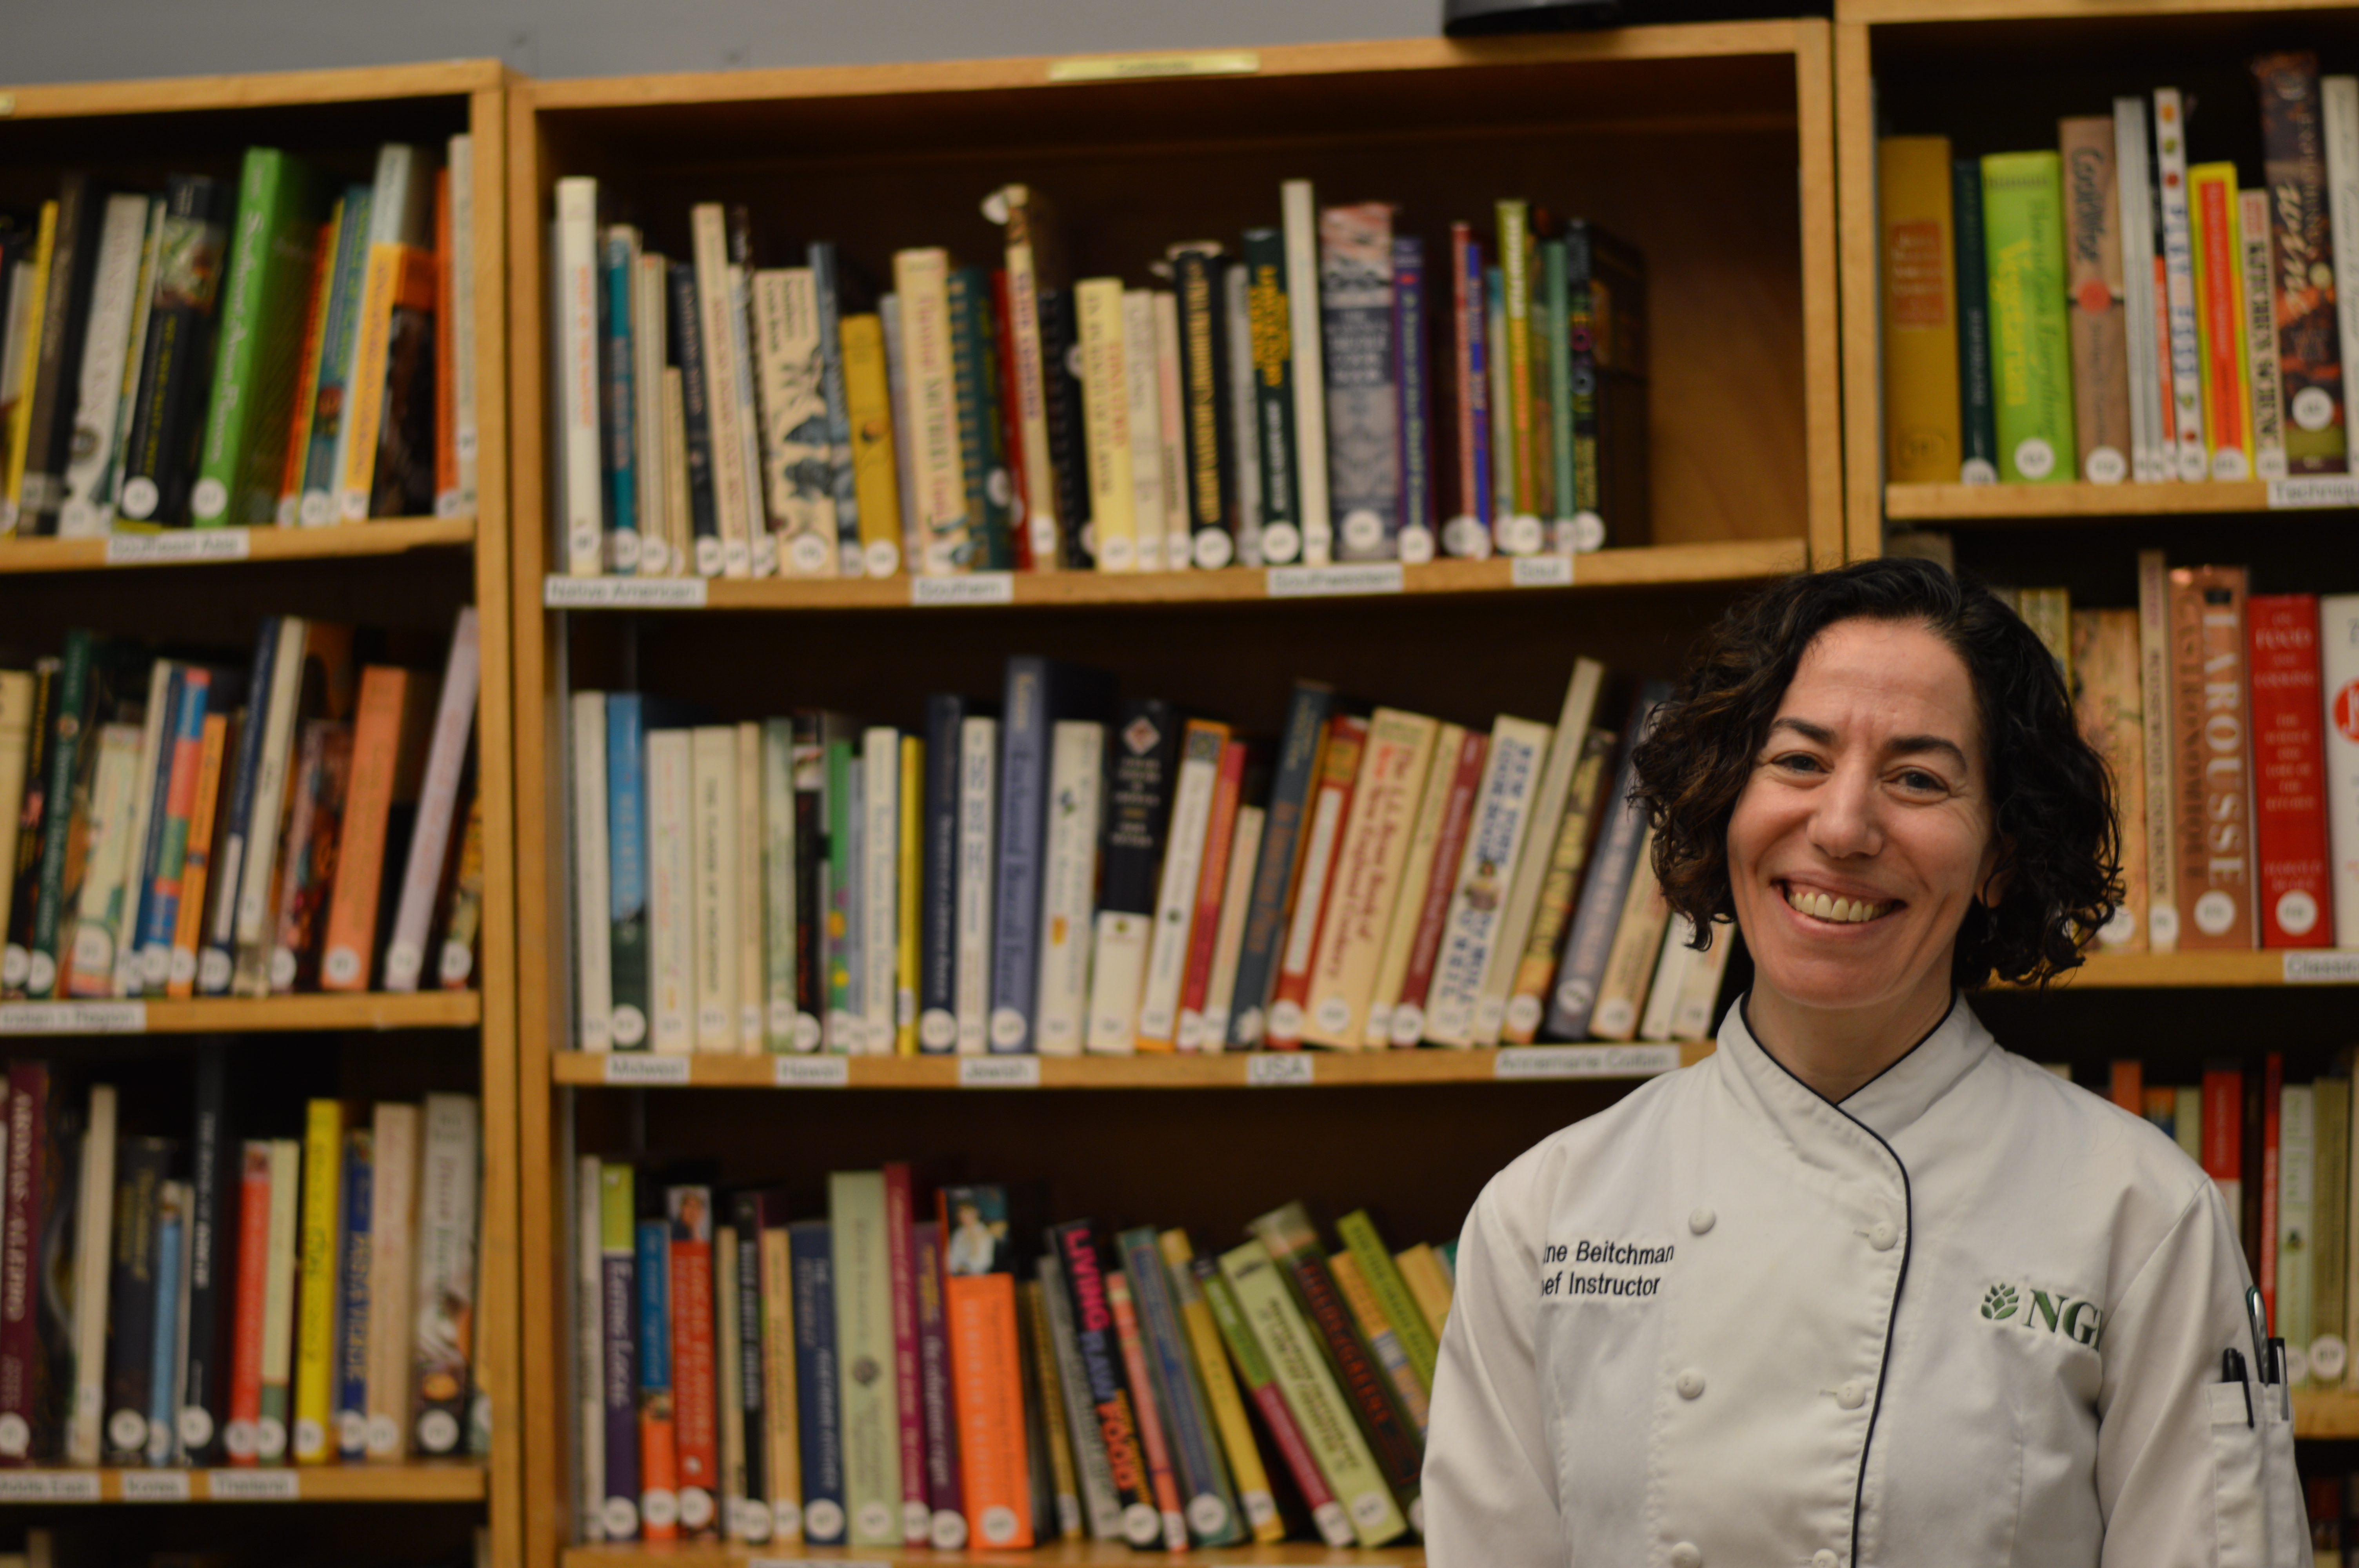 Chef Celine Beitchman developed curriculum at the Natural Gourmet Institute.